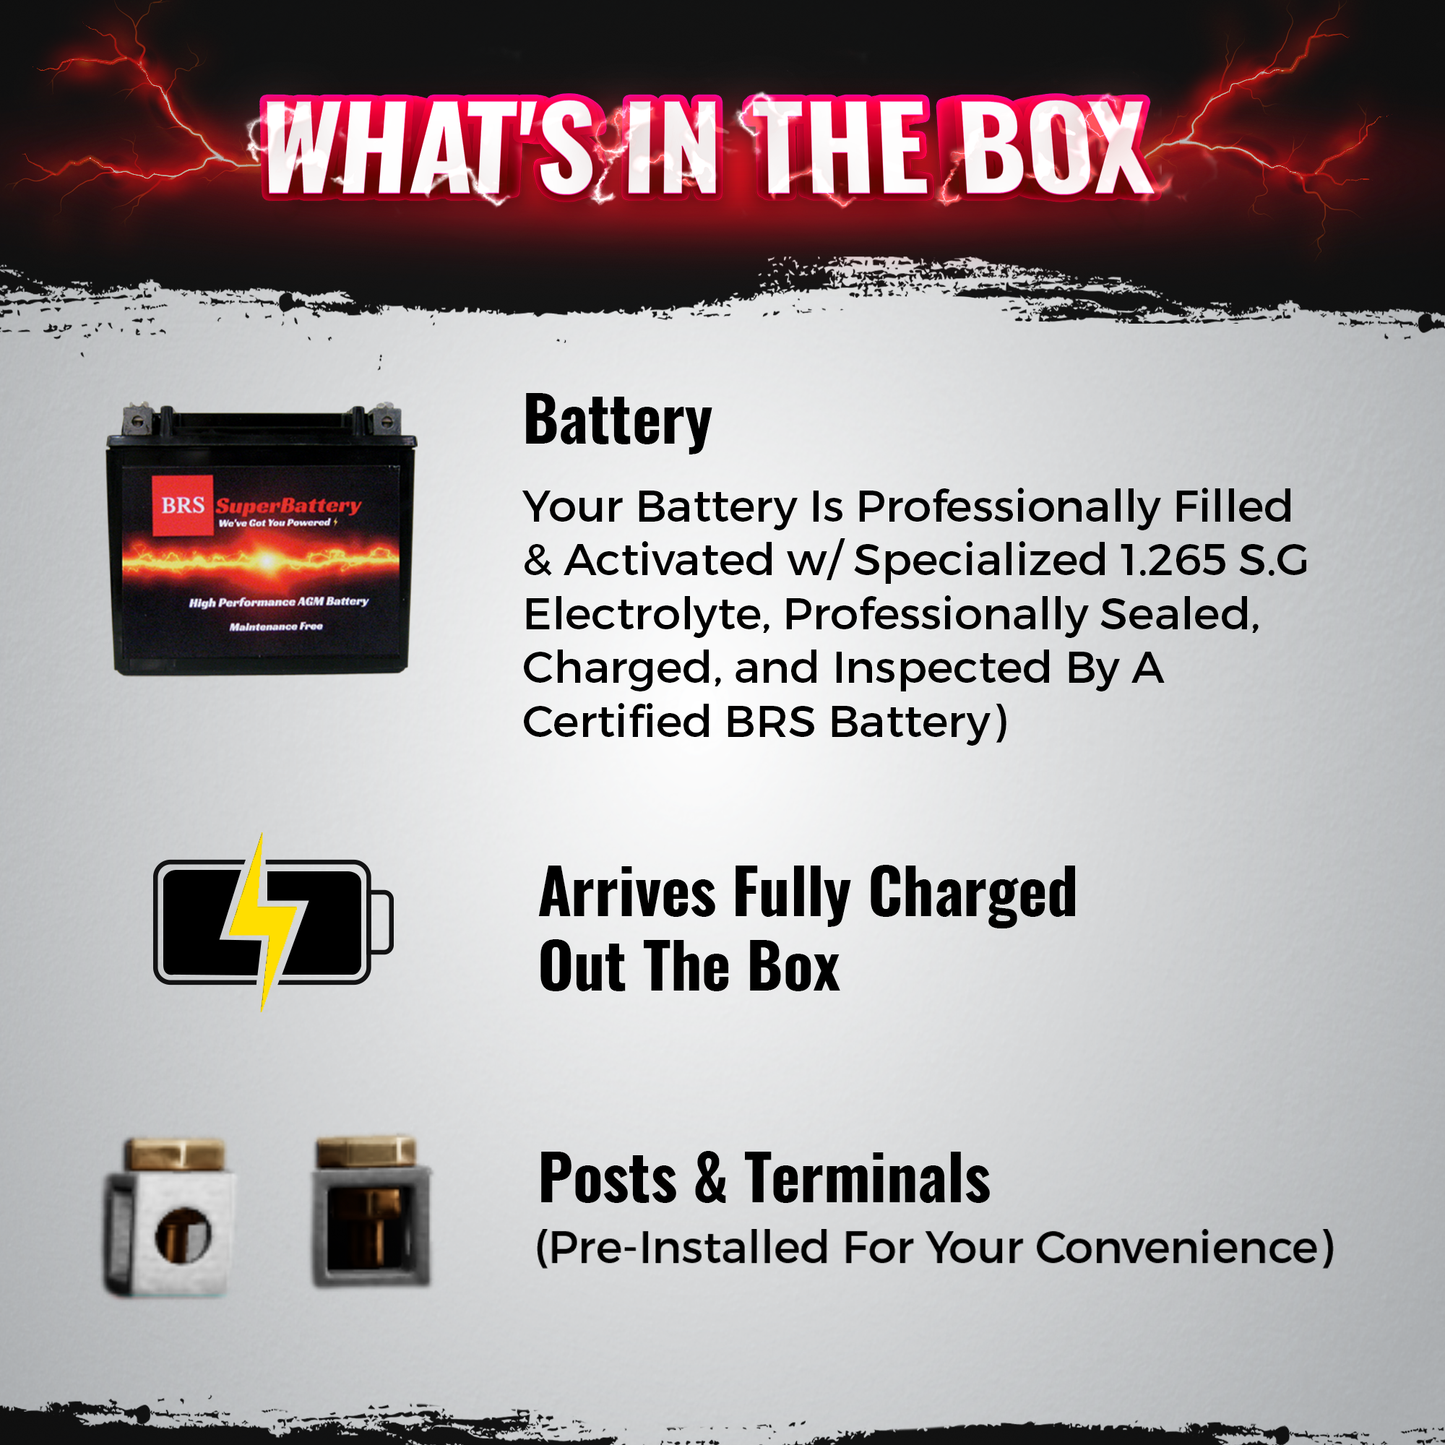 BRS4L-BS 12v High Performance Sealed AGM PowerSport 10 Year Battery - BRS Super Battery